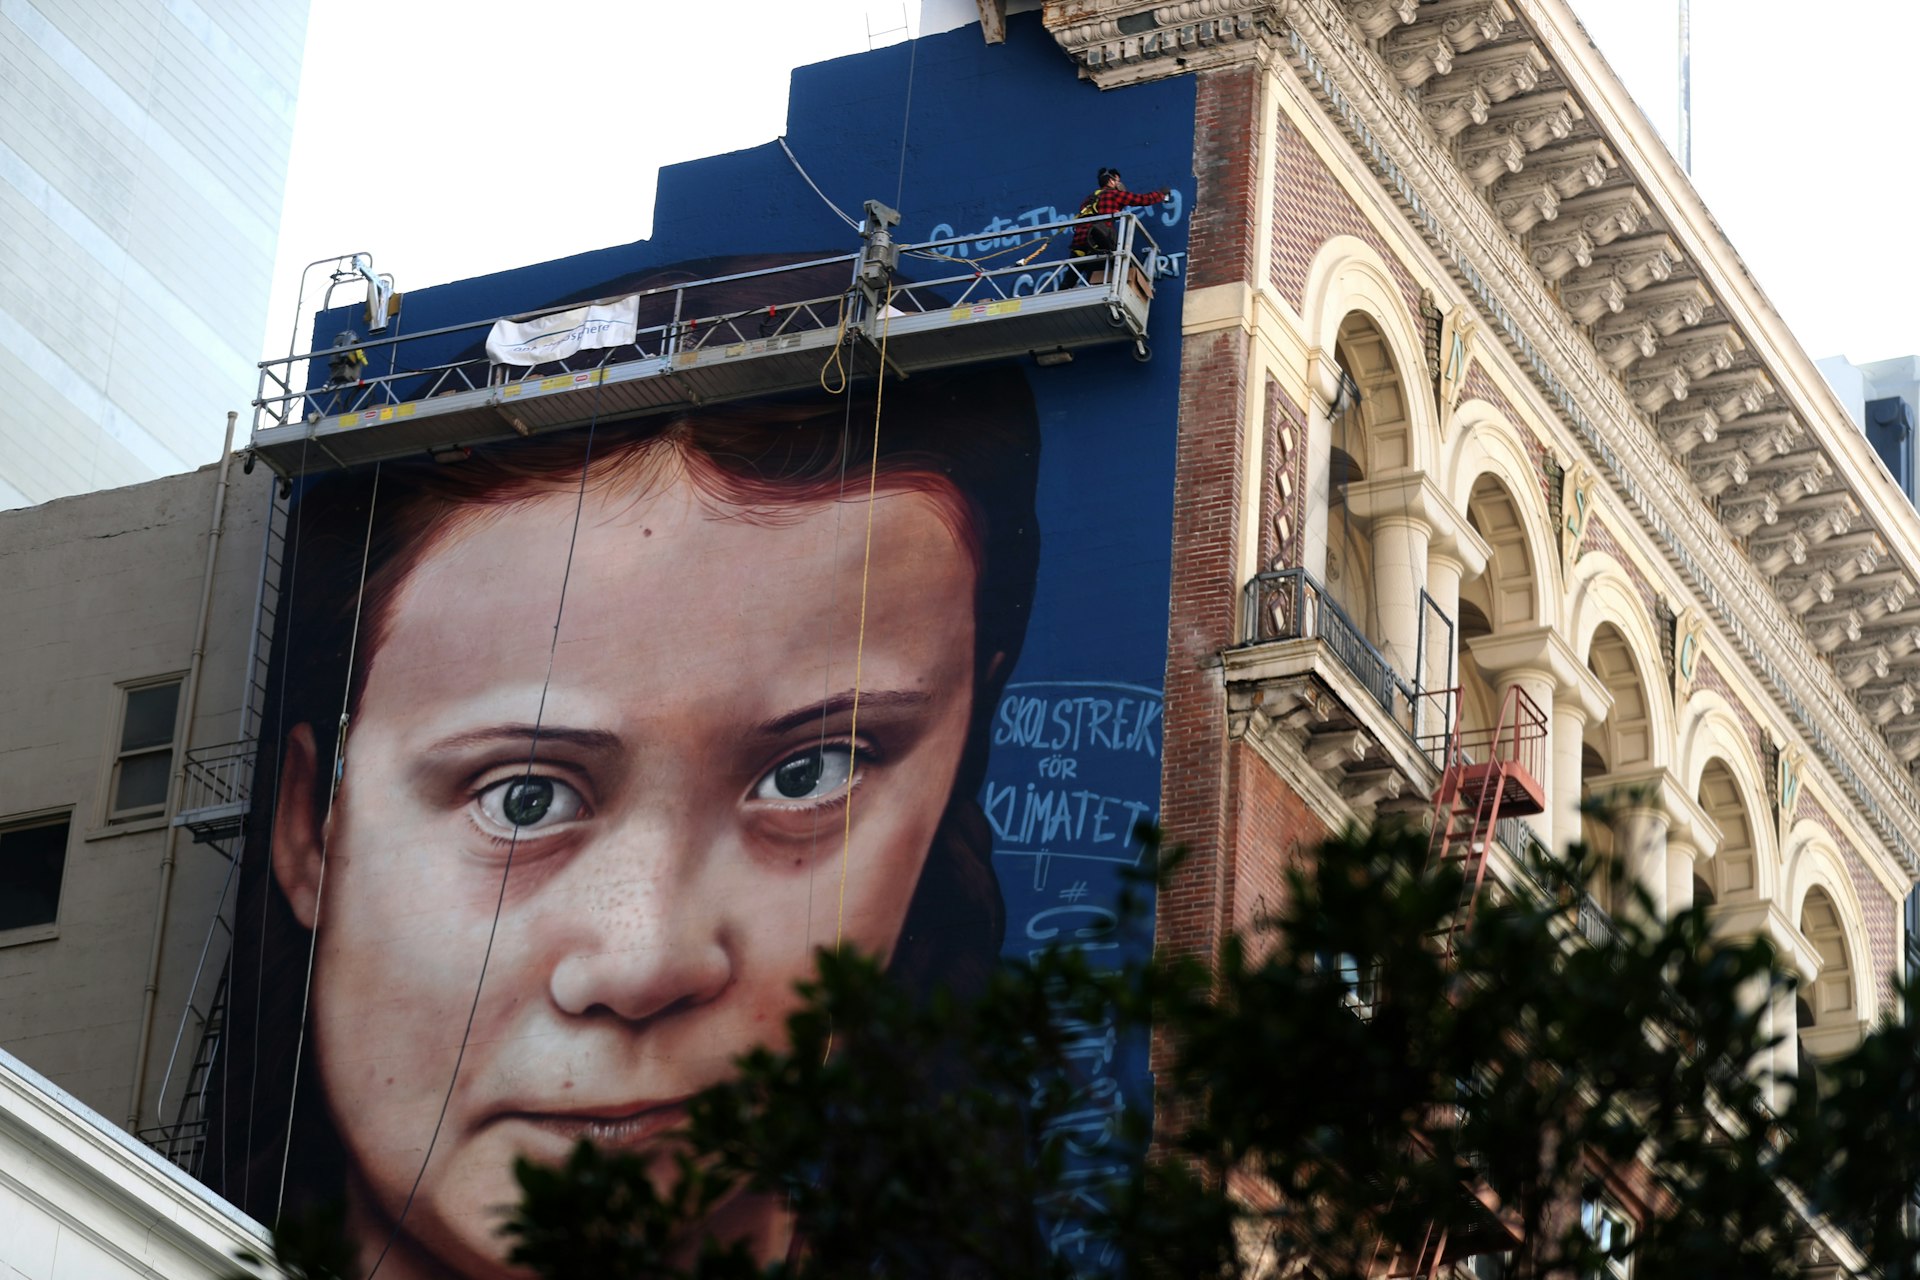 A picture of the mural, with a zoomed in Greta Thunberg